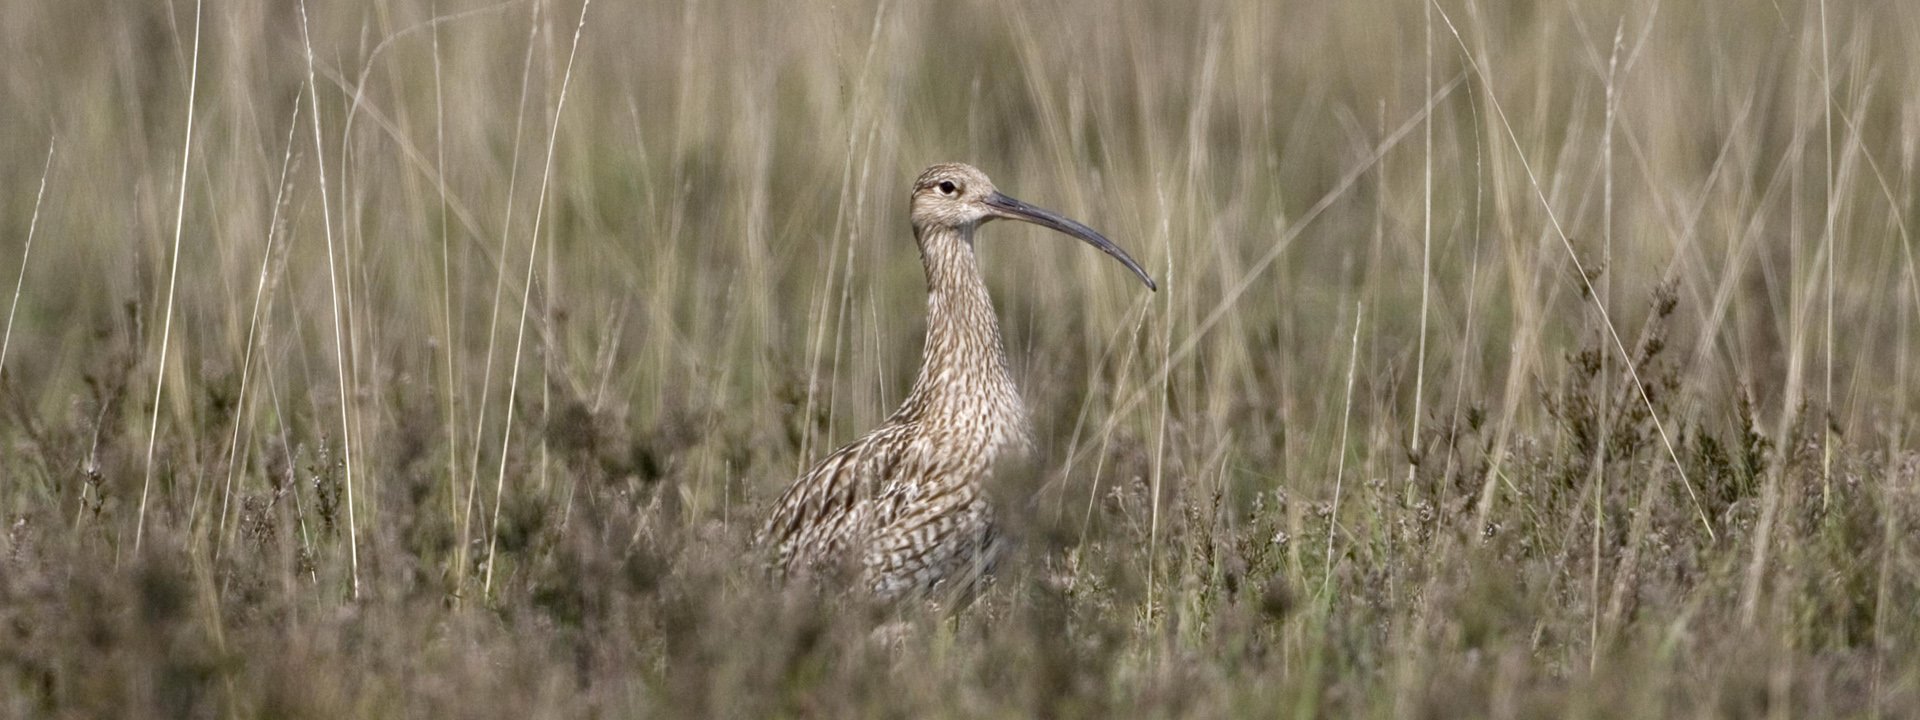 Eurasion Curlew on New Forest heathland